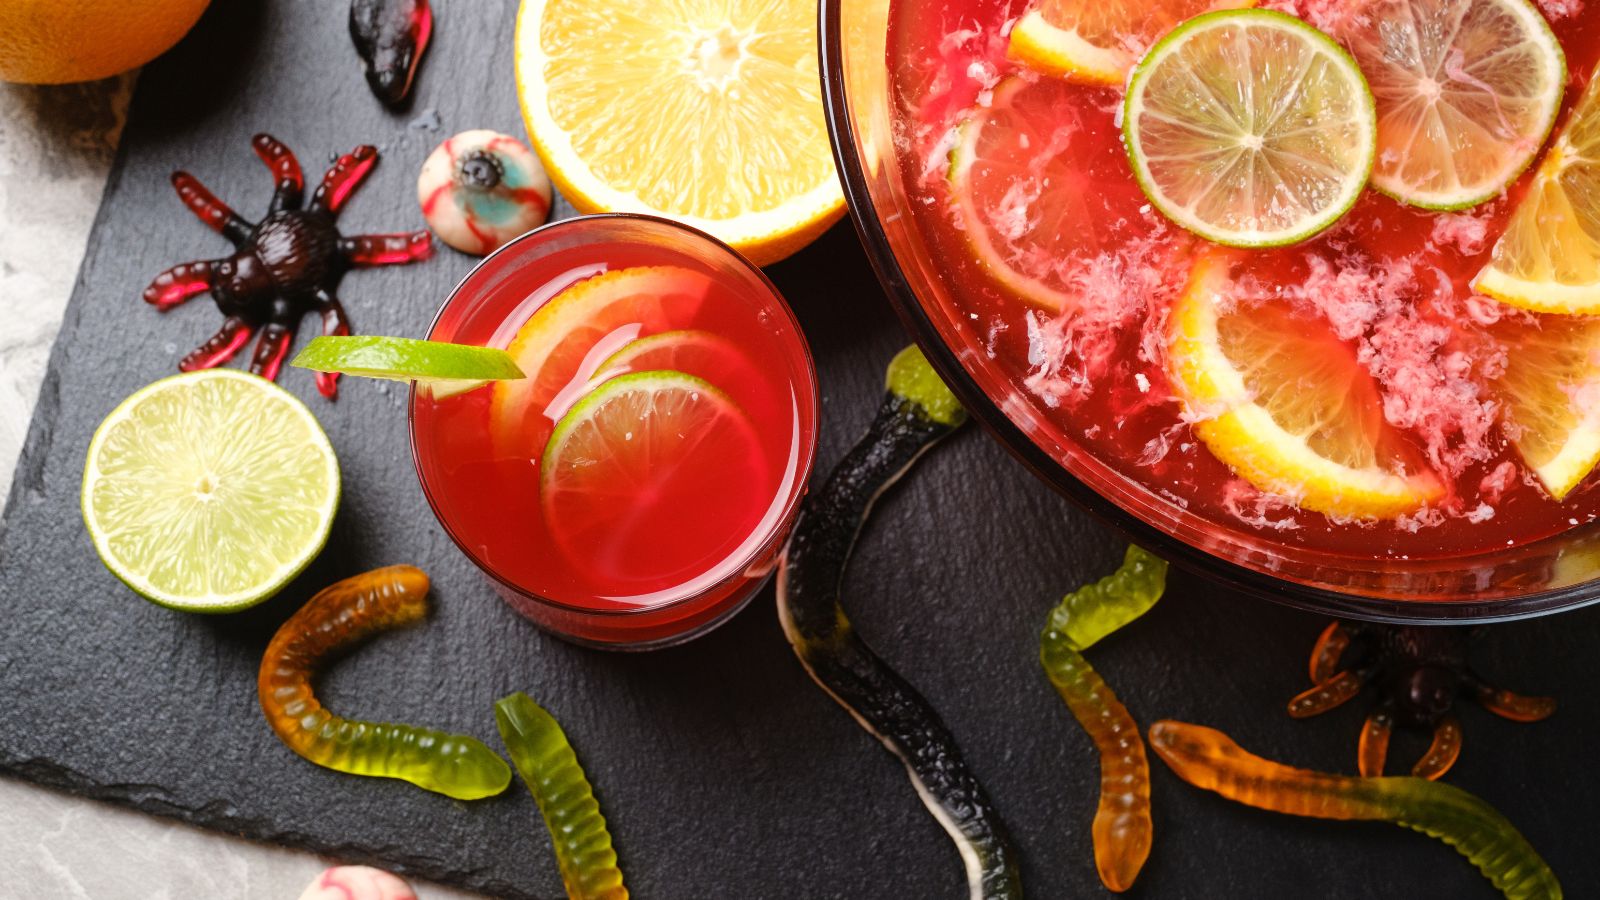 Hocus pocus punch with gummy worms and spiders.
